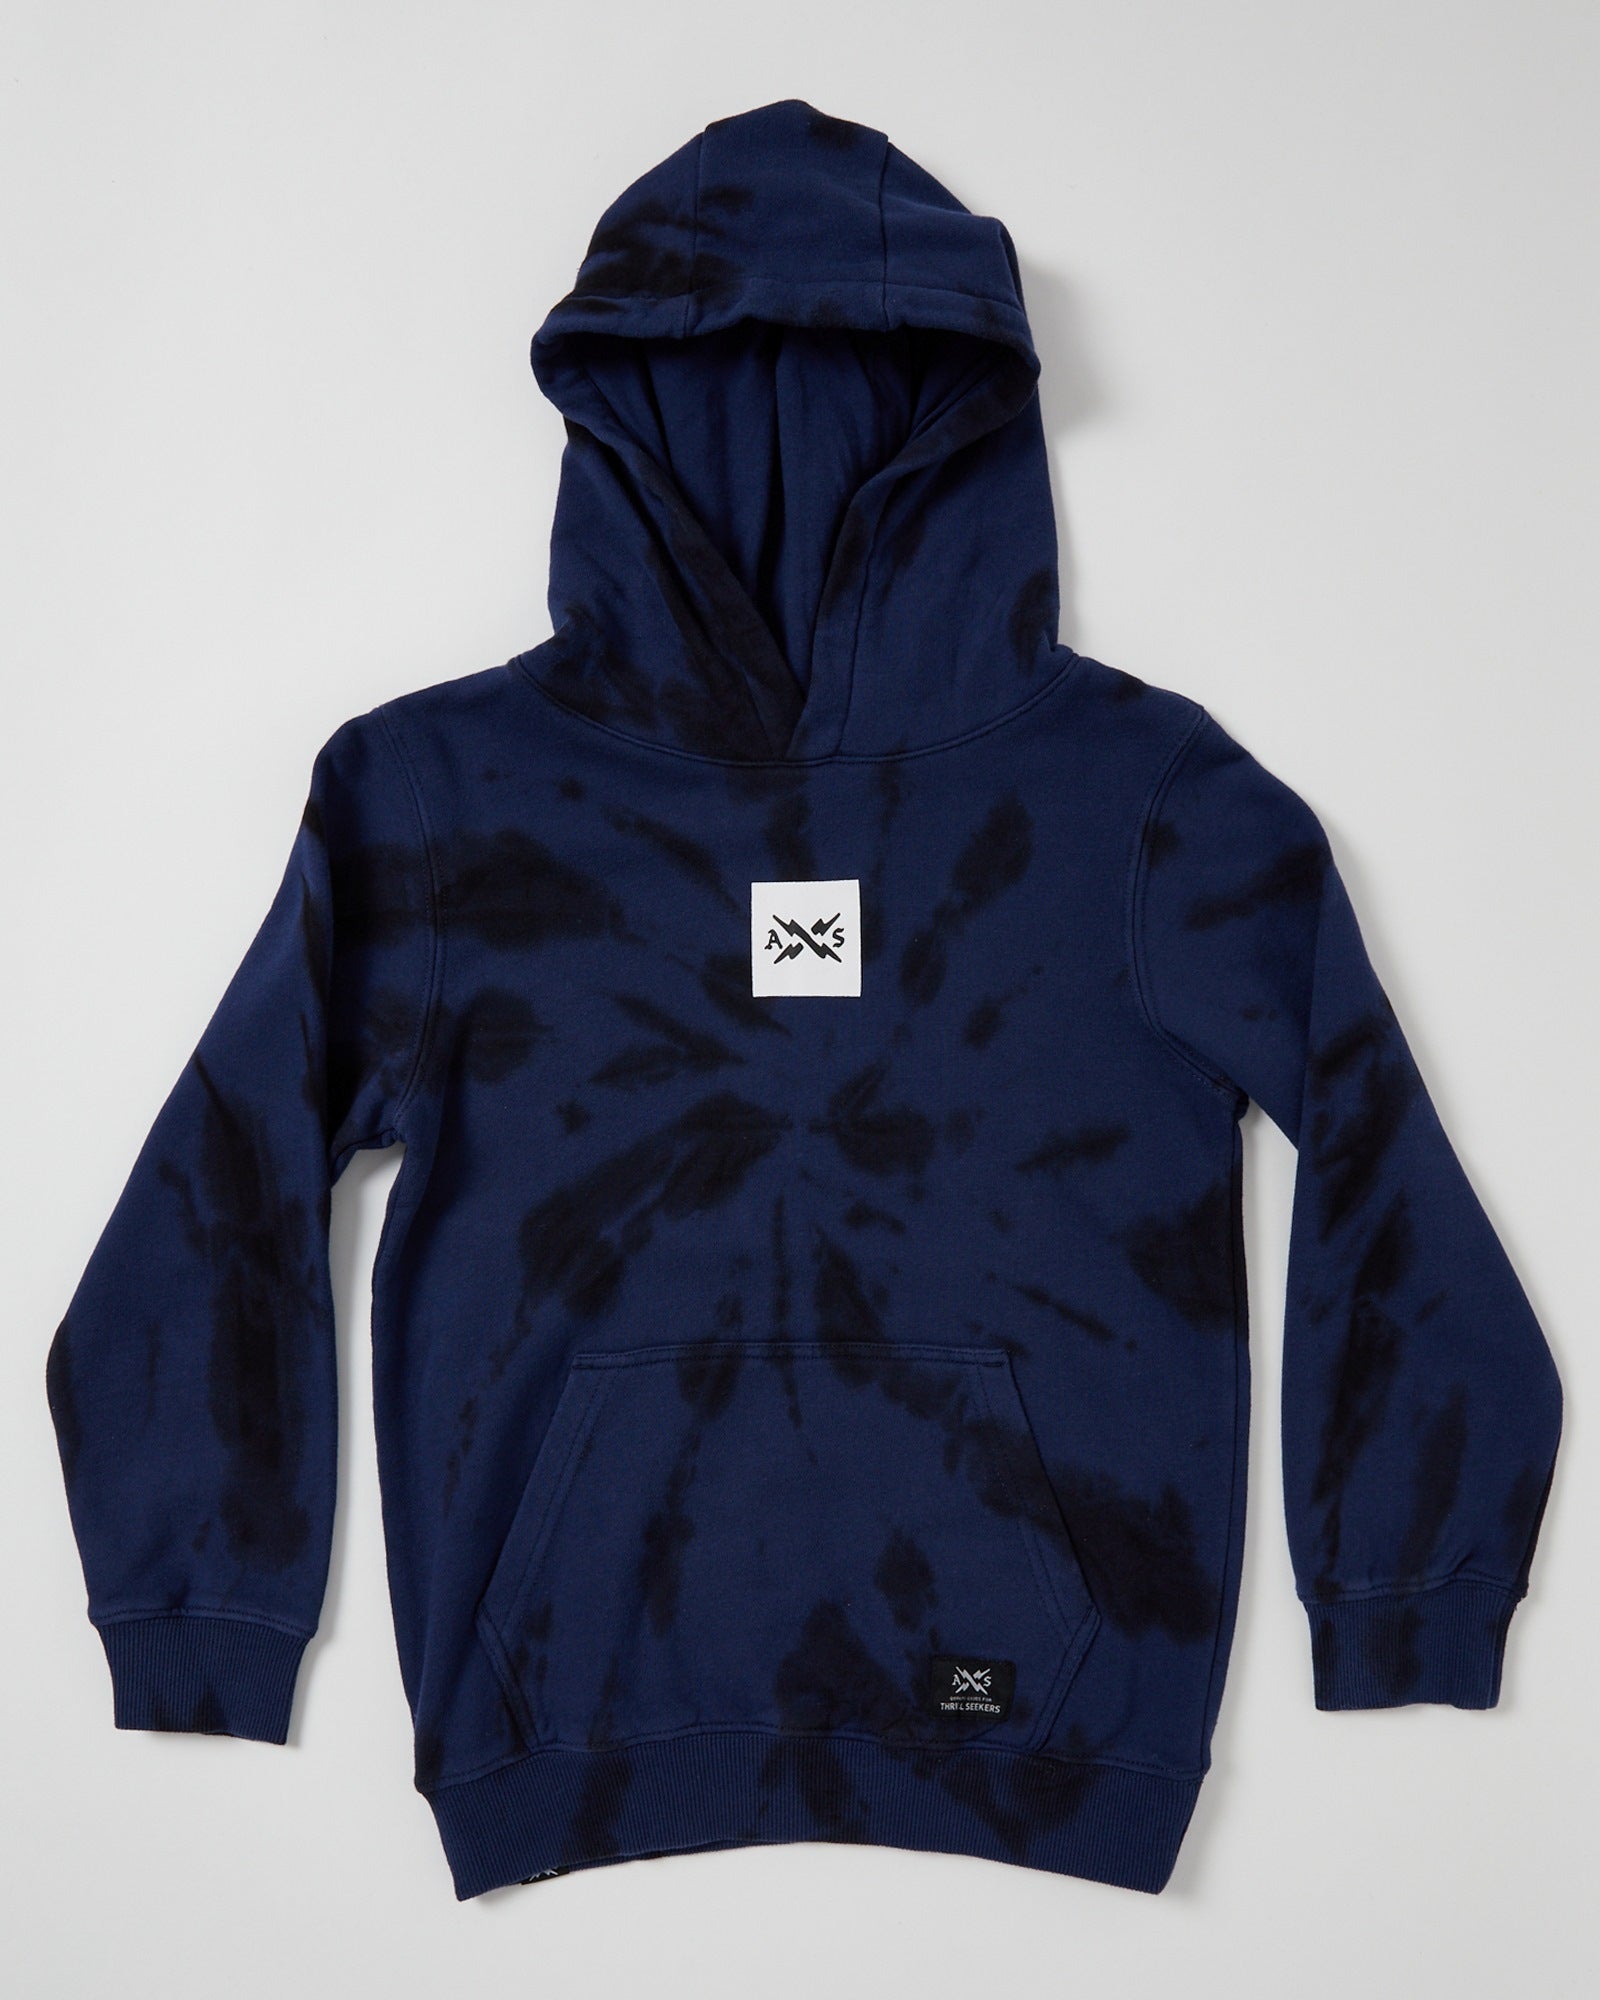 Alphabet Soup Kids Box Hoodie in midnight blue tie dye, made with 100% cotton and a tie-dye fabric, your little skater will love the oversized fit, kangaroo pocket, and logo embroidery patch on the centre chest. 